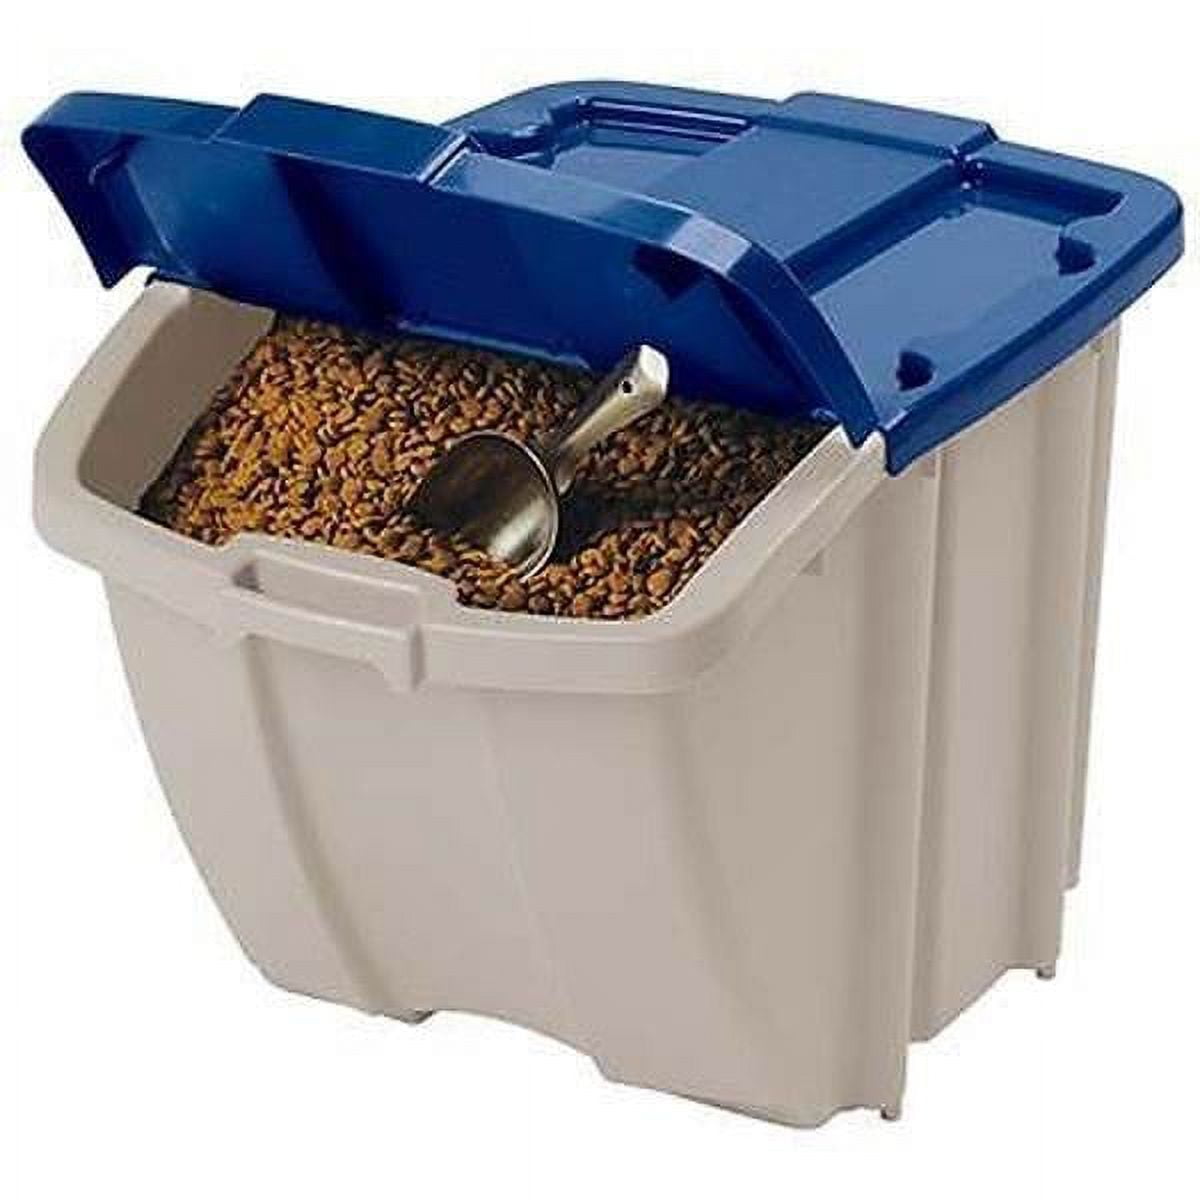 Suncast BH18GRN2 Stackable Recycling Bin Containers with Lids